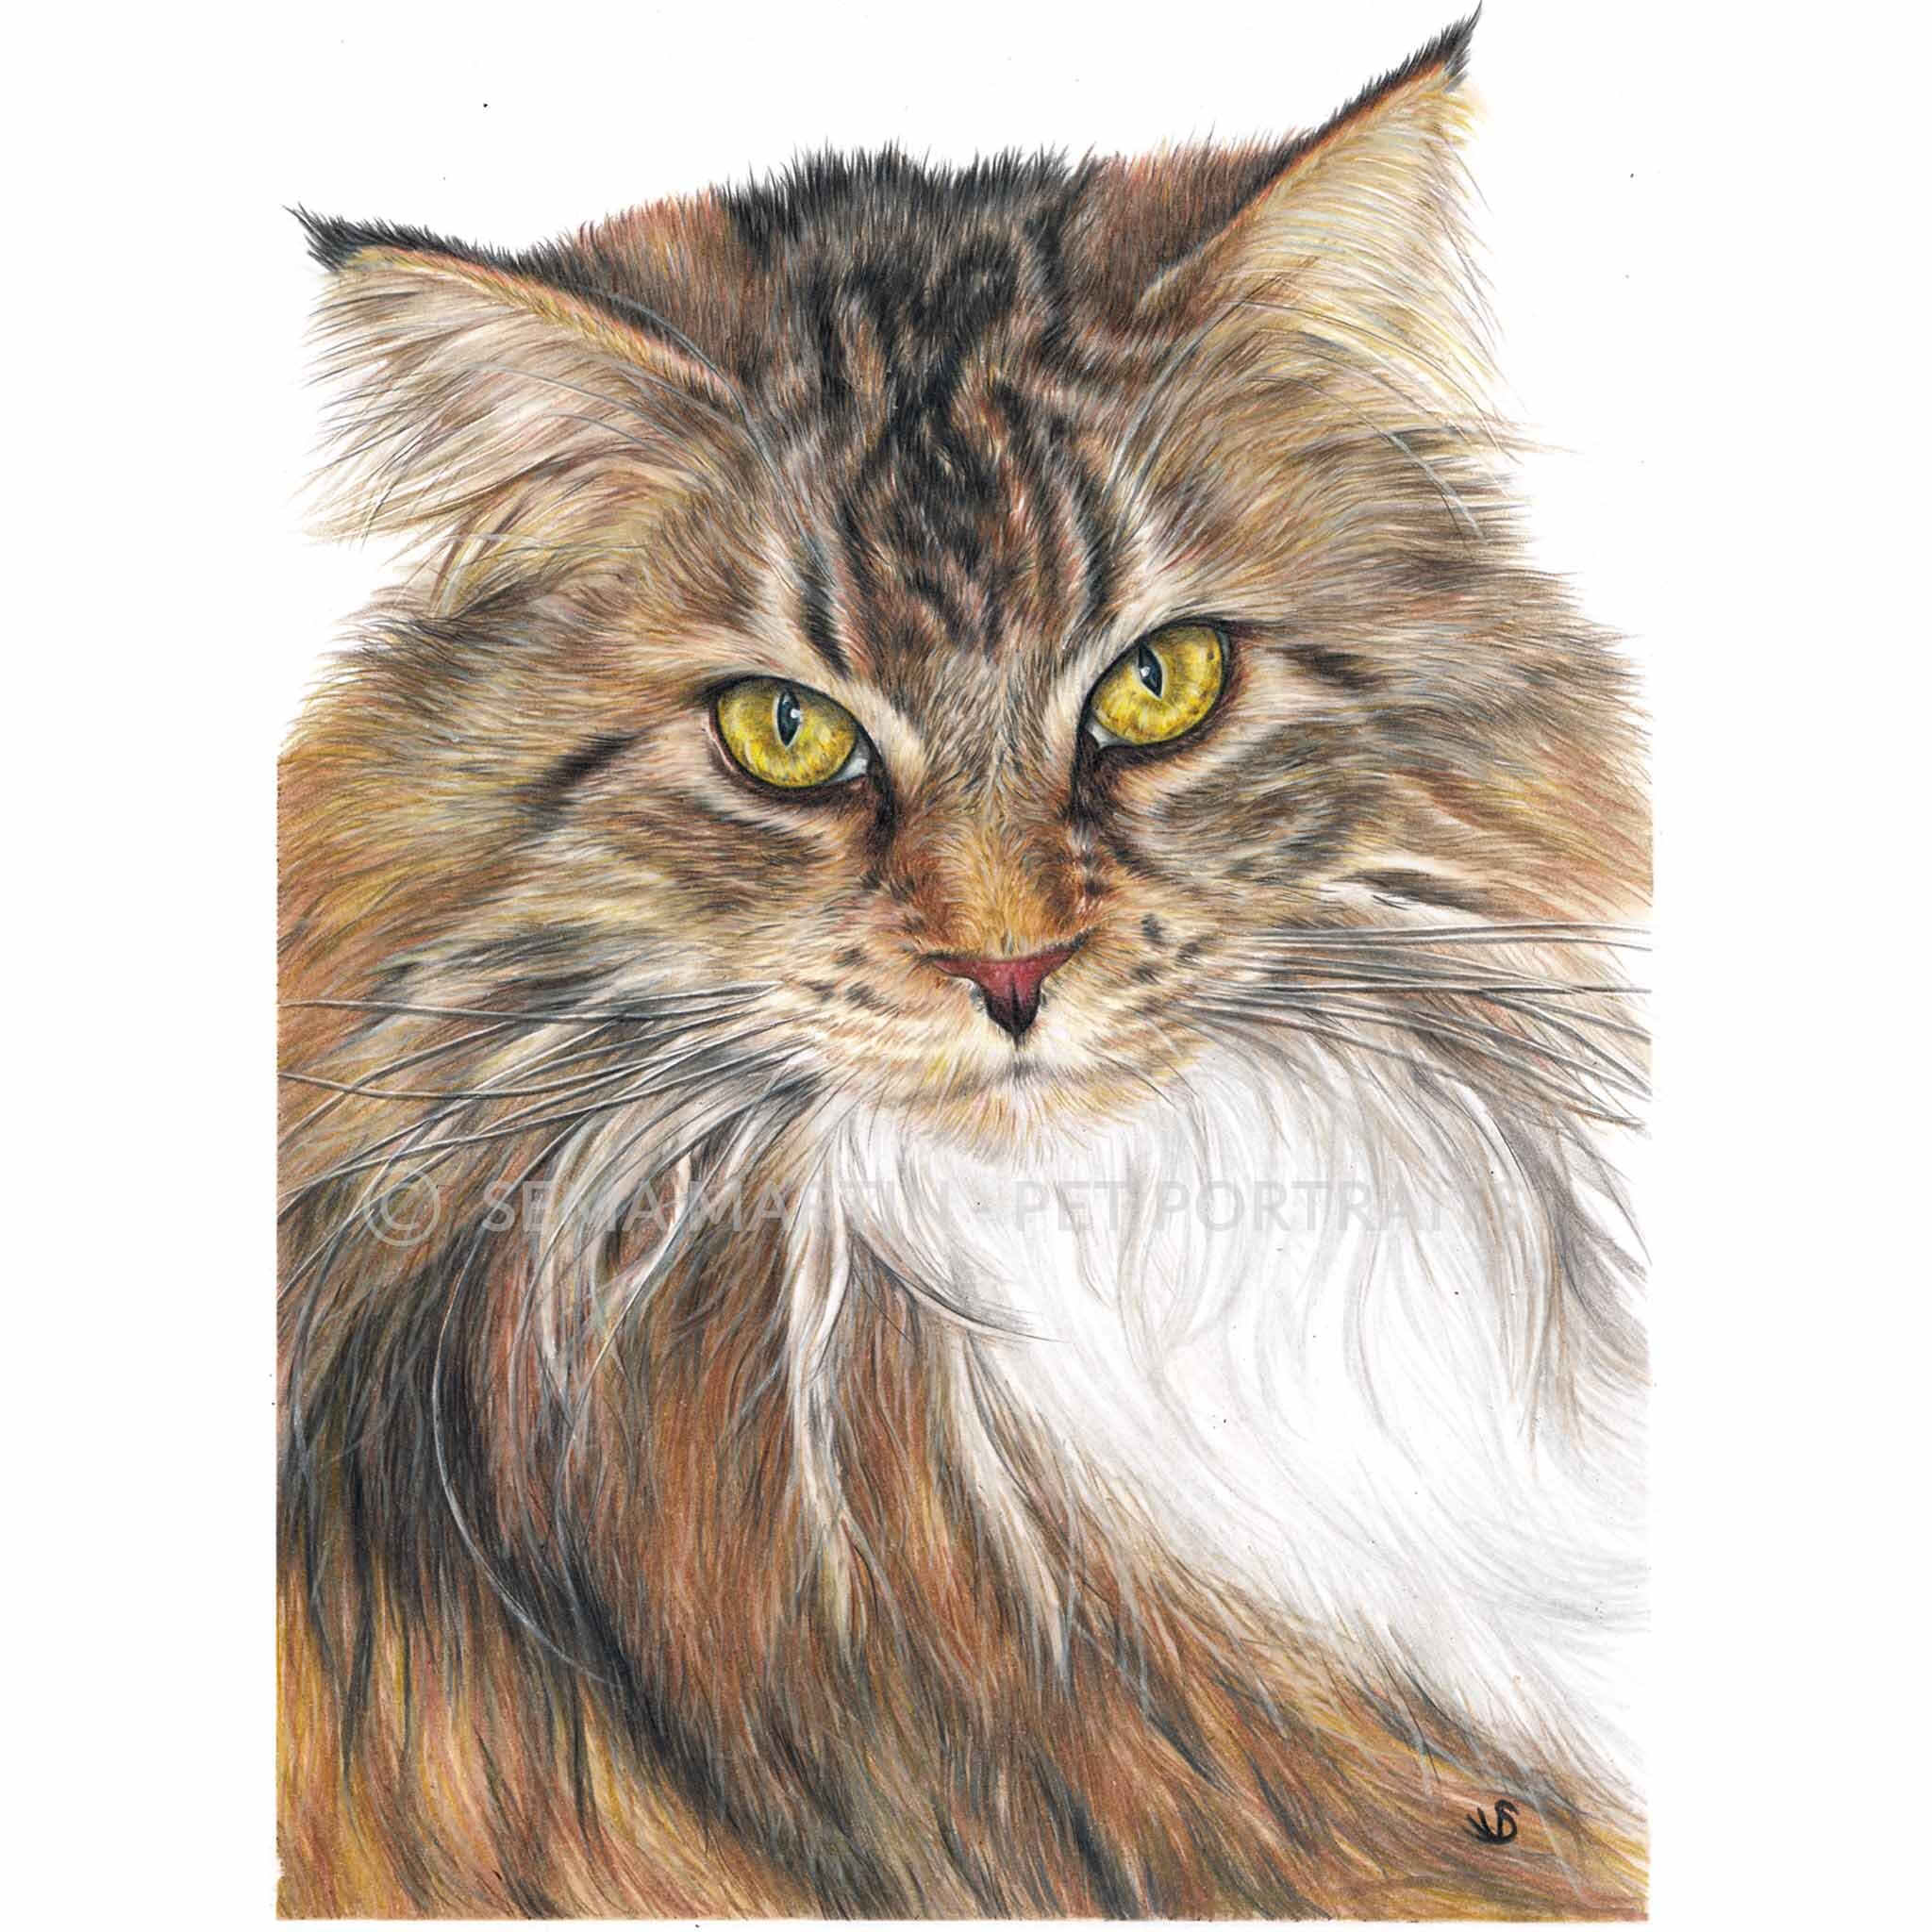 Drawing of Libby the Maine Coon cat with yellow eyes from South Carolina, USA (Copy)